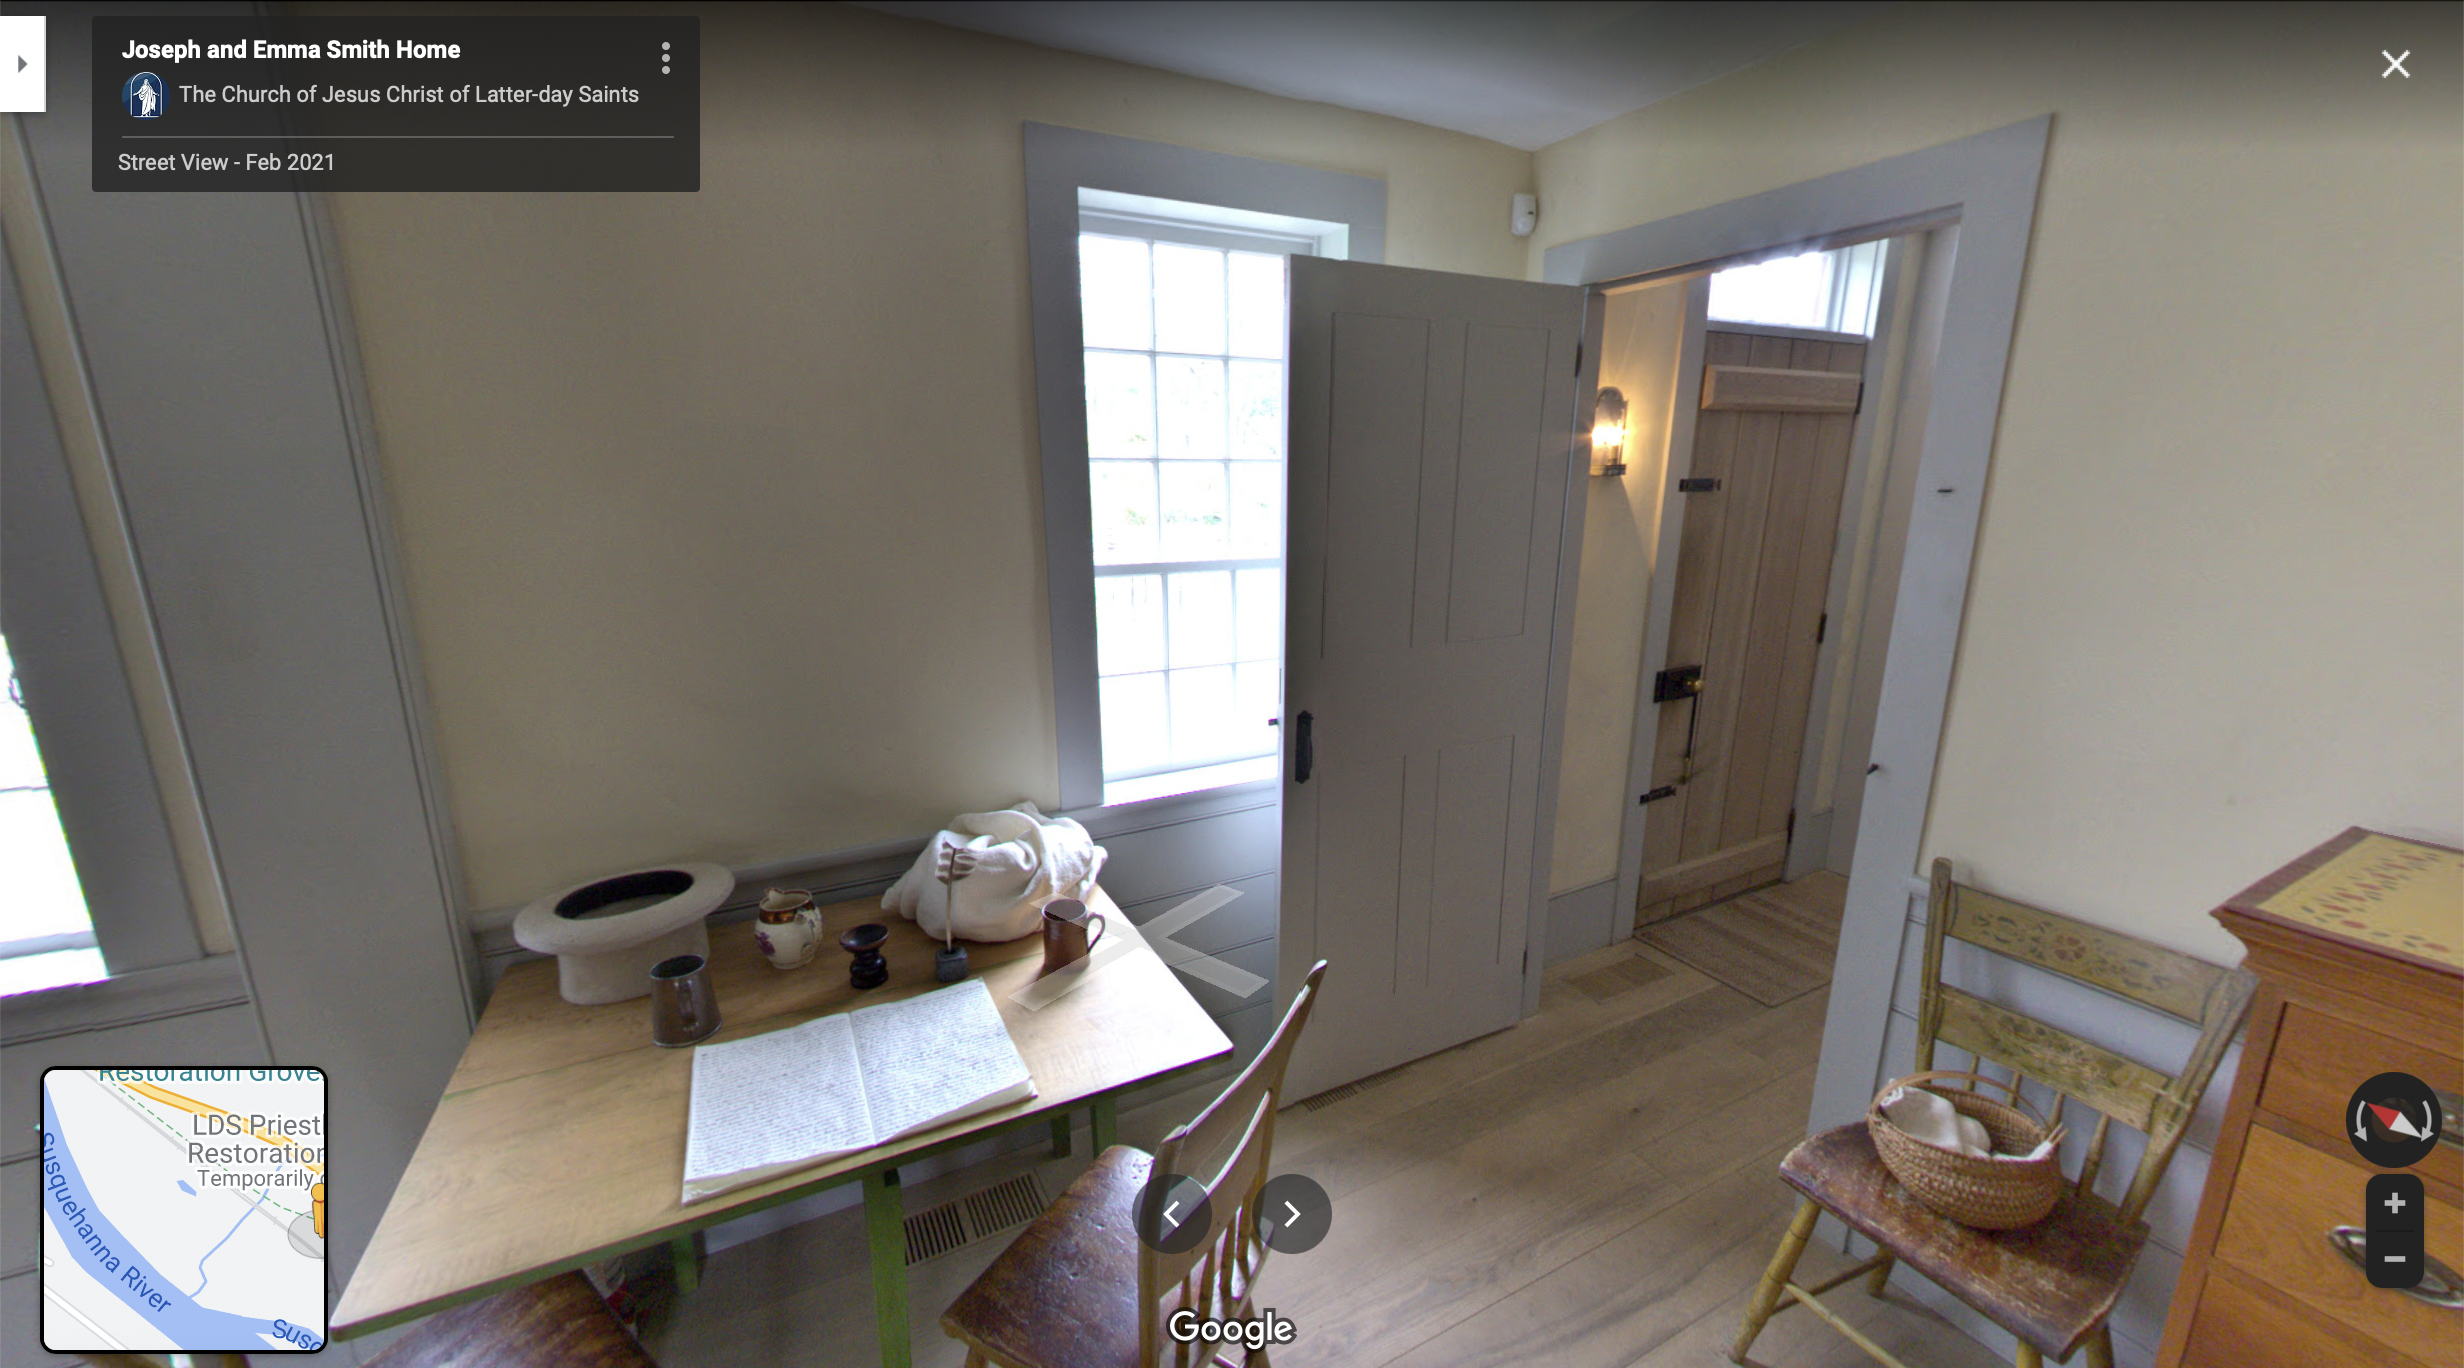 Screenshot of the Google Maps 360 view of Joseph and Emma's Home in Harmony